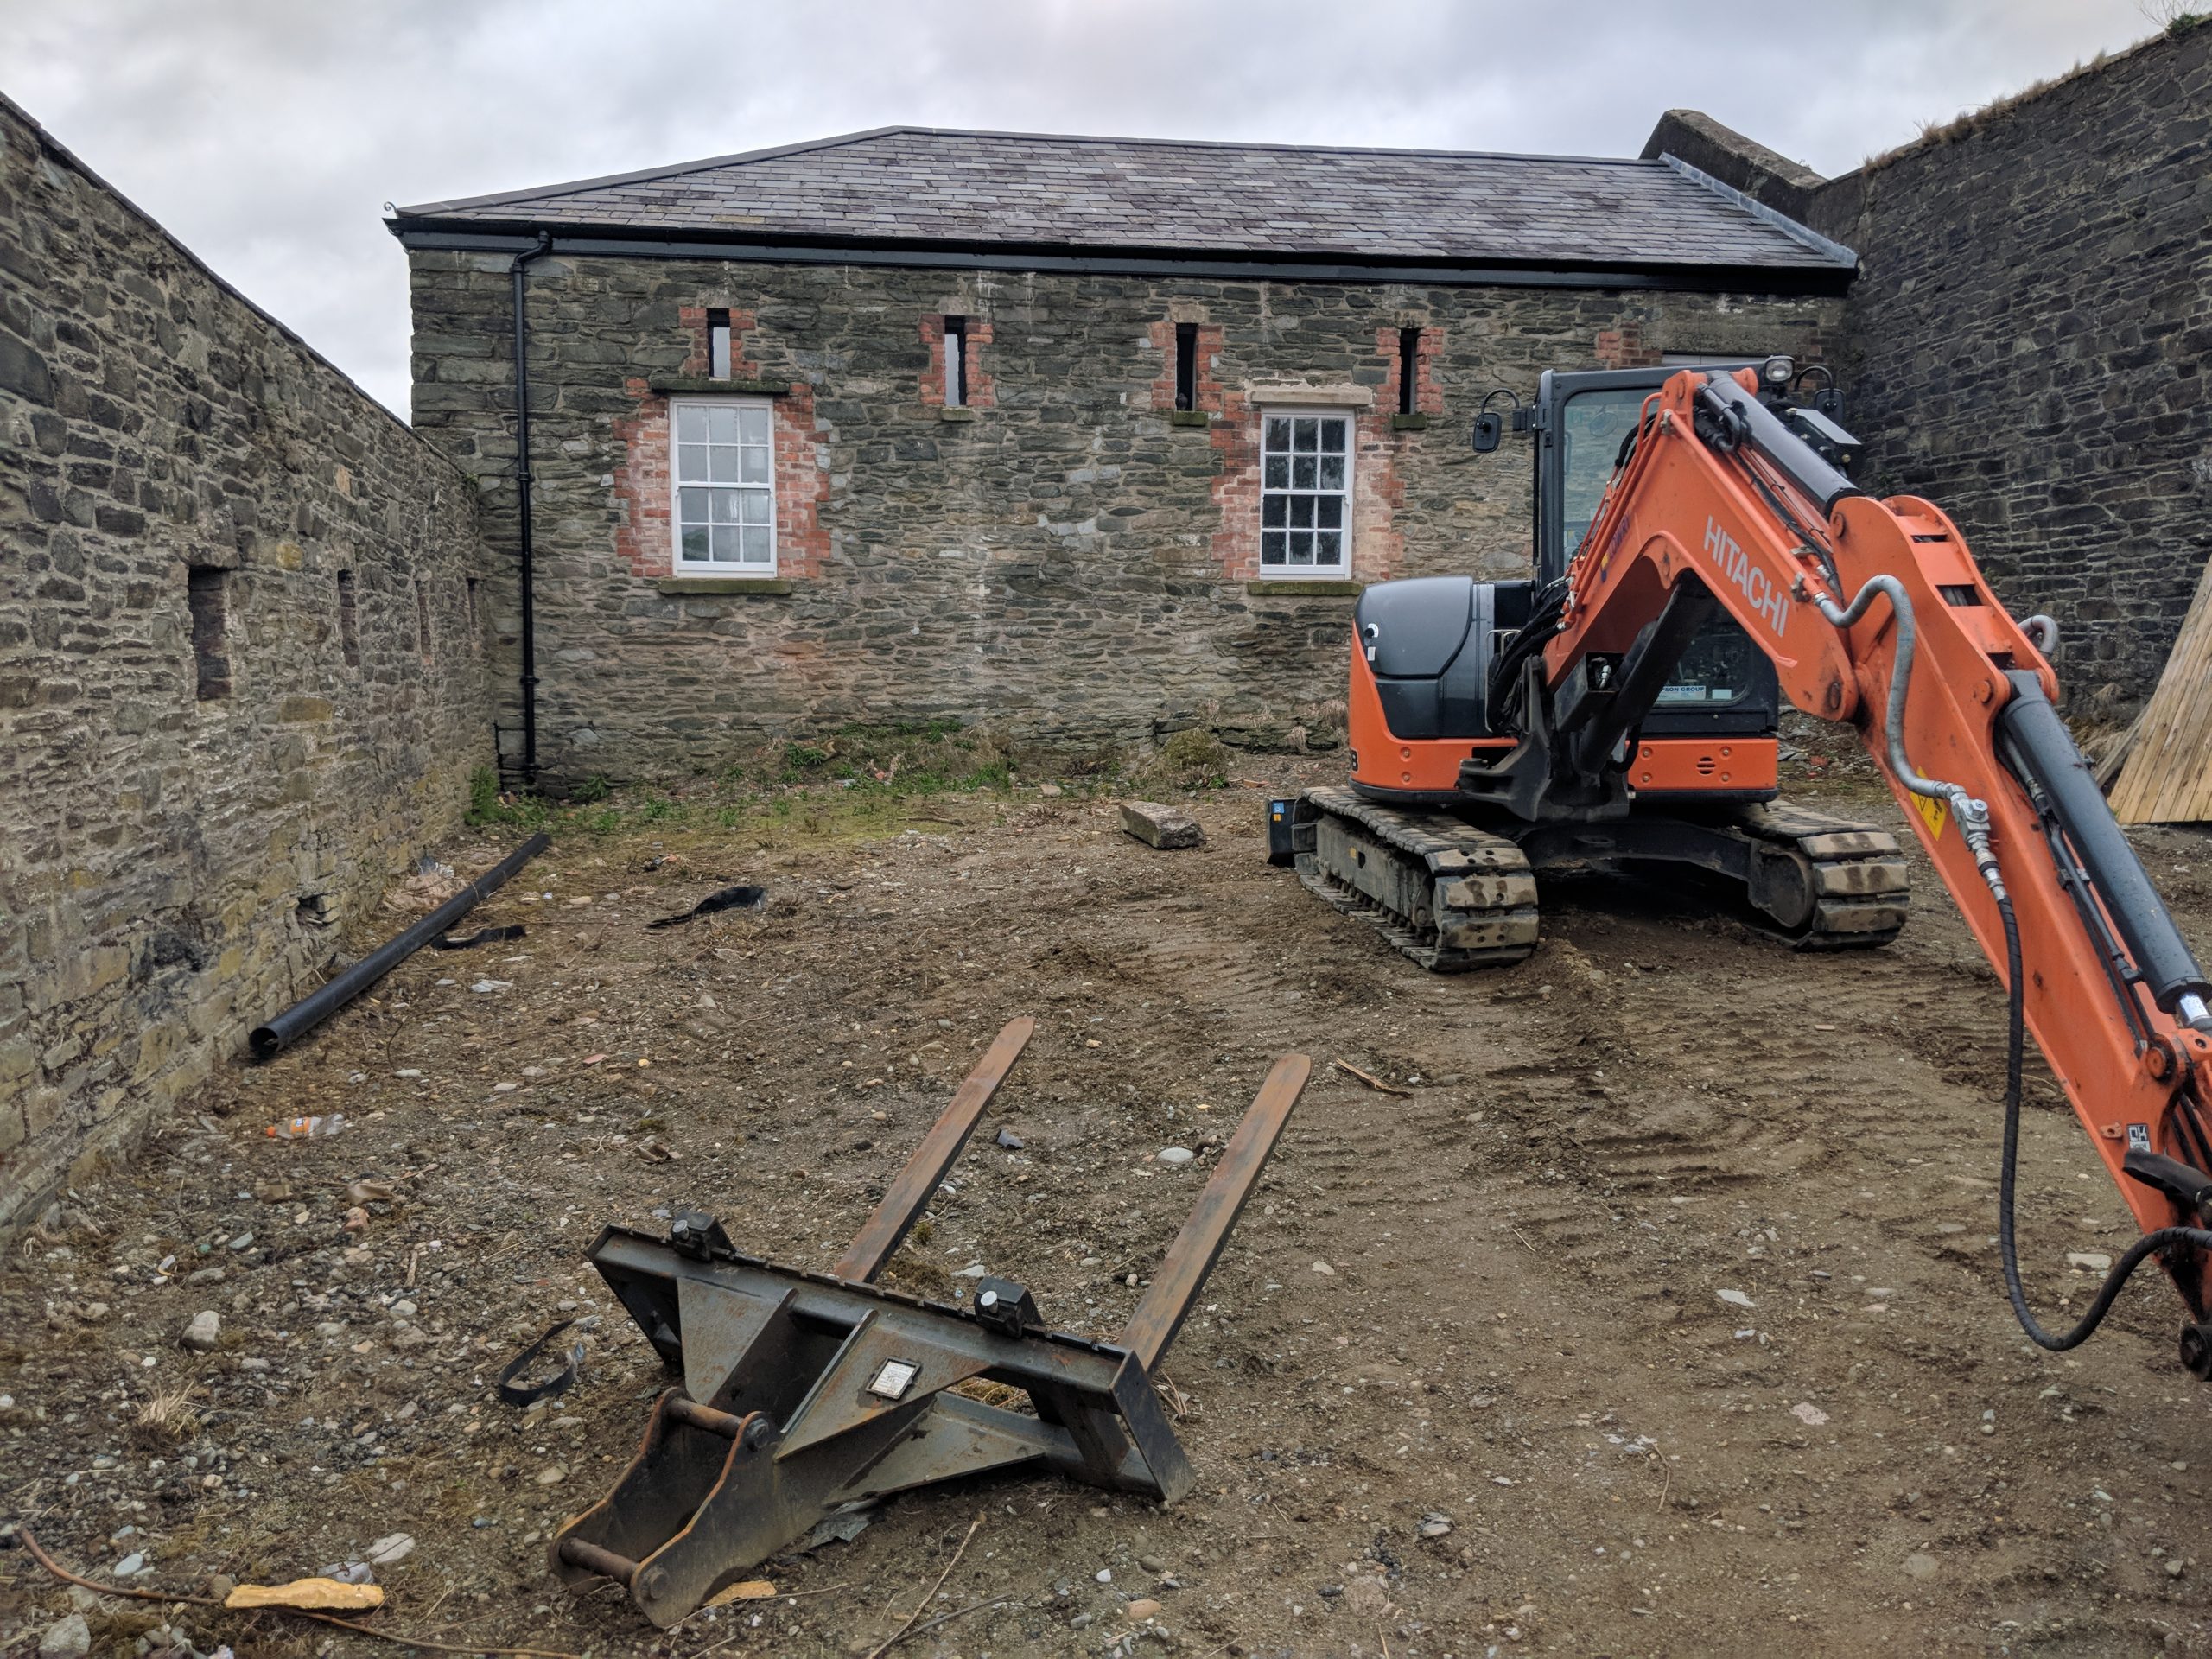 Works Beginning on Scheduled Monument at Building 30 “The Keep”